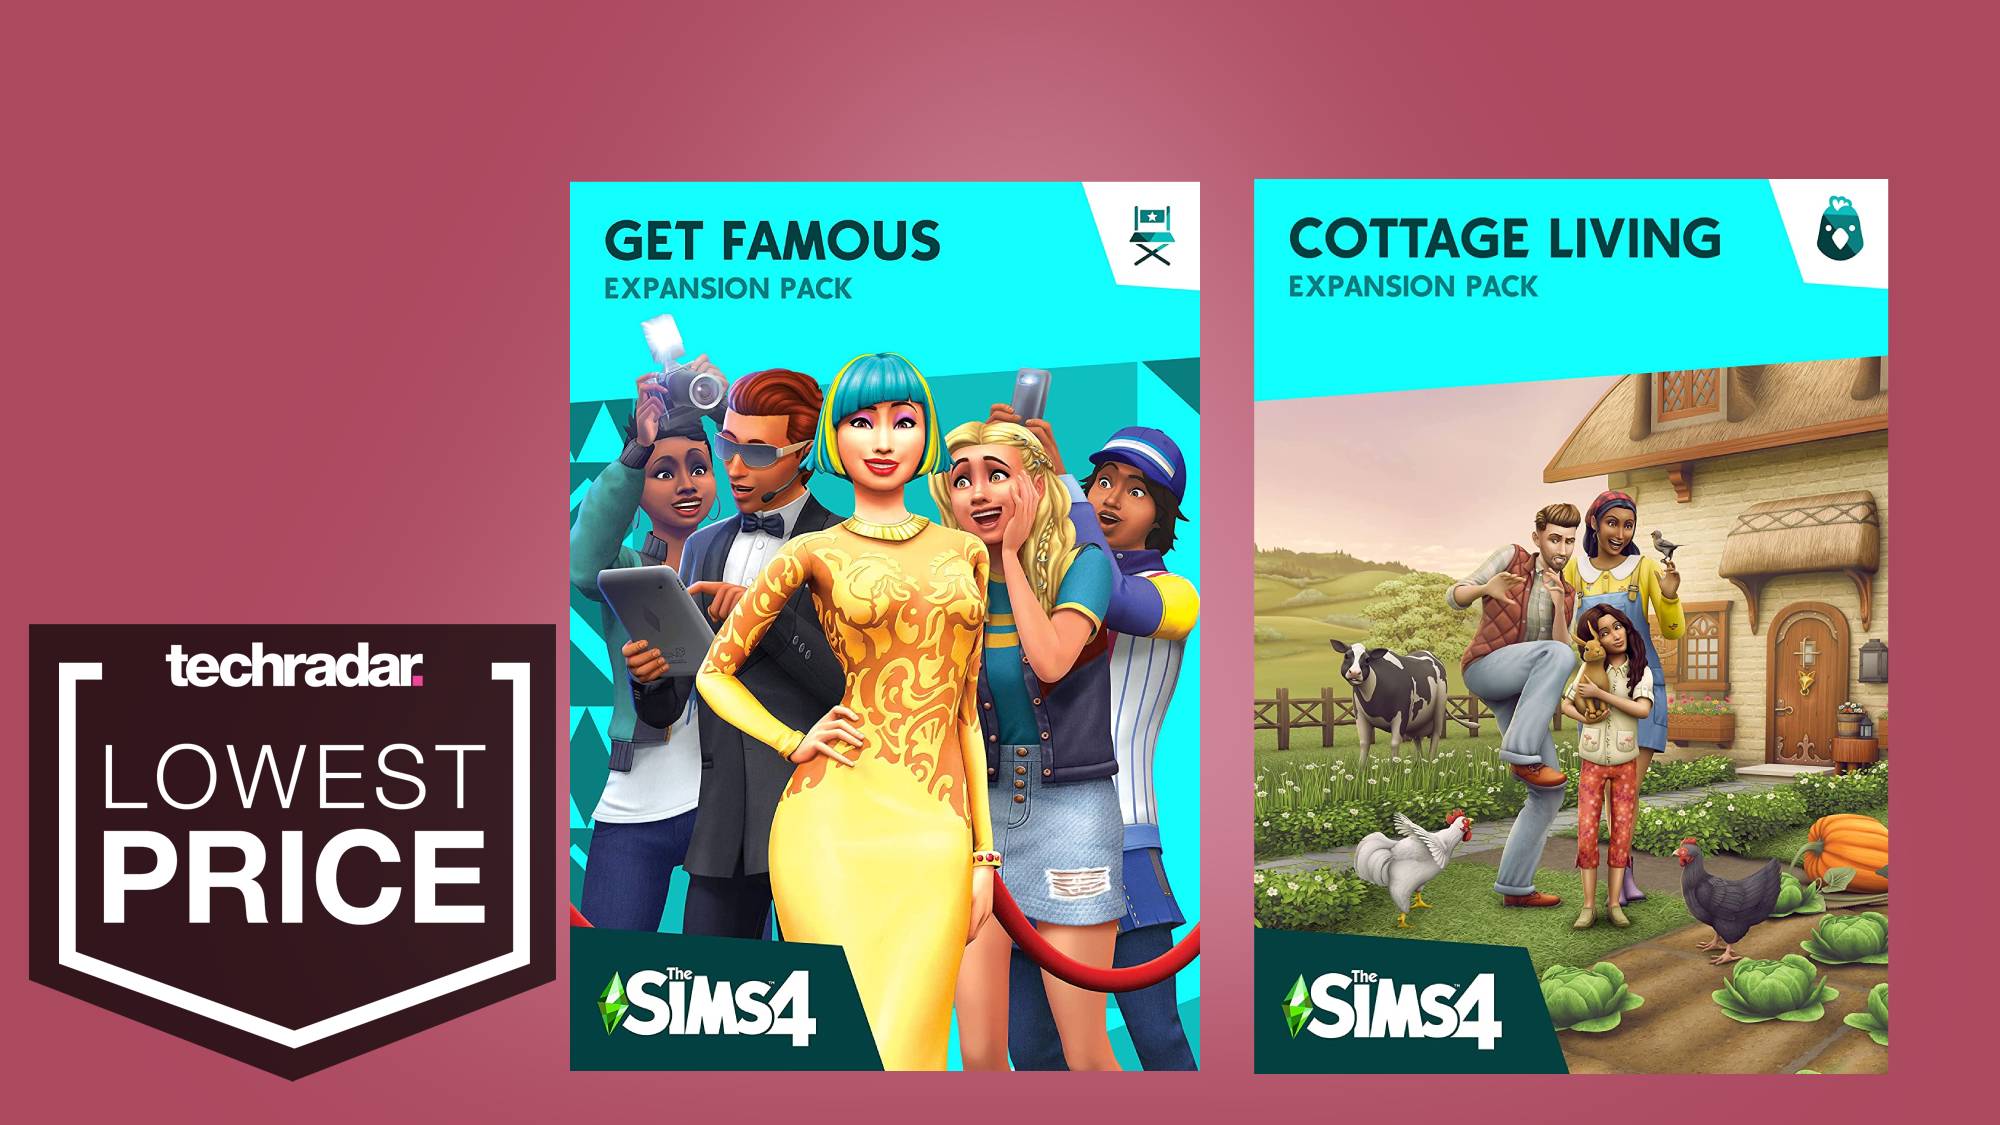 Free Demo  How To Get The Sims 4 With All DLC and Stuff Packs - UPDATED 